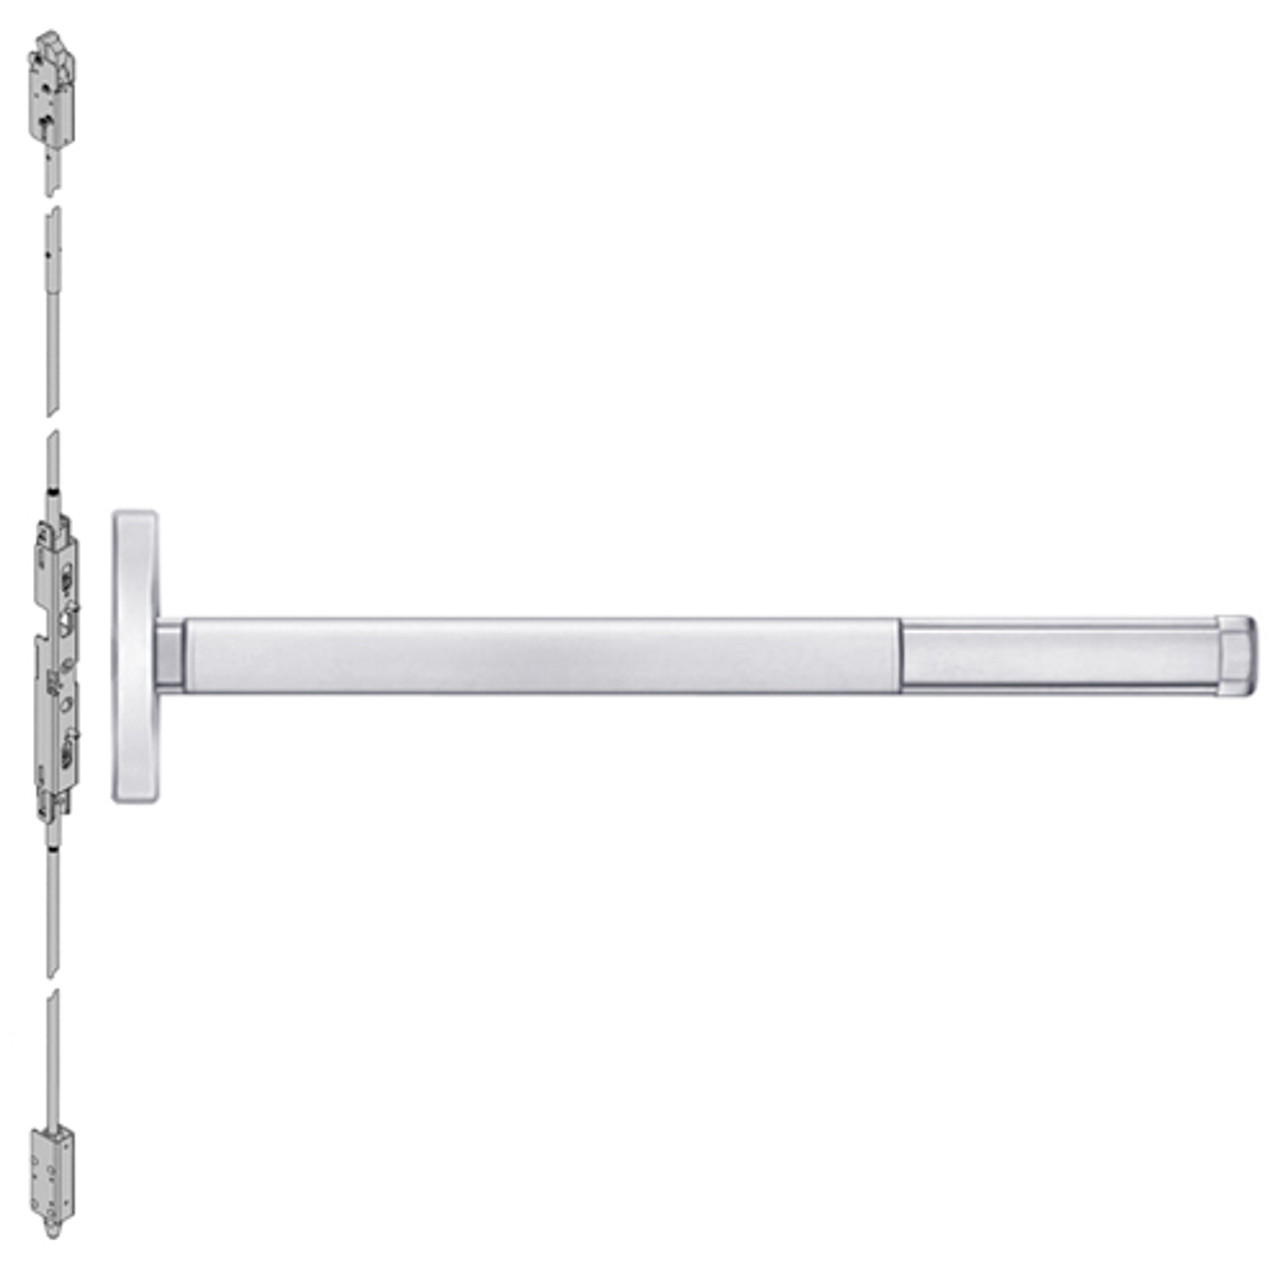 DEFL2614LBR-625-48 PHI 2600 Series Fire Rated Concealed Vertical Rod Exit Device with Delayed Egress Prepped for Lever Always Active in Bright Chrome Finish